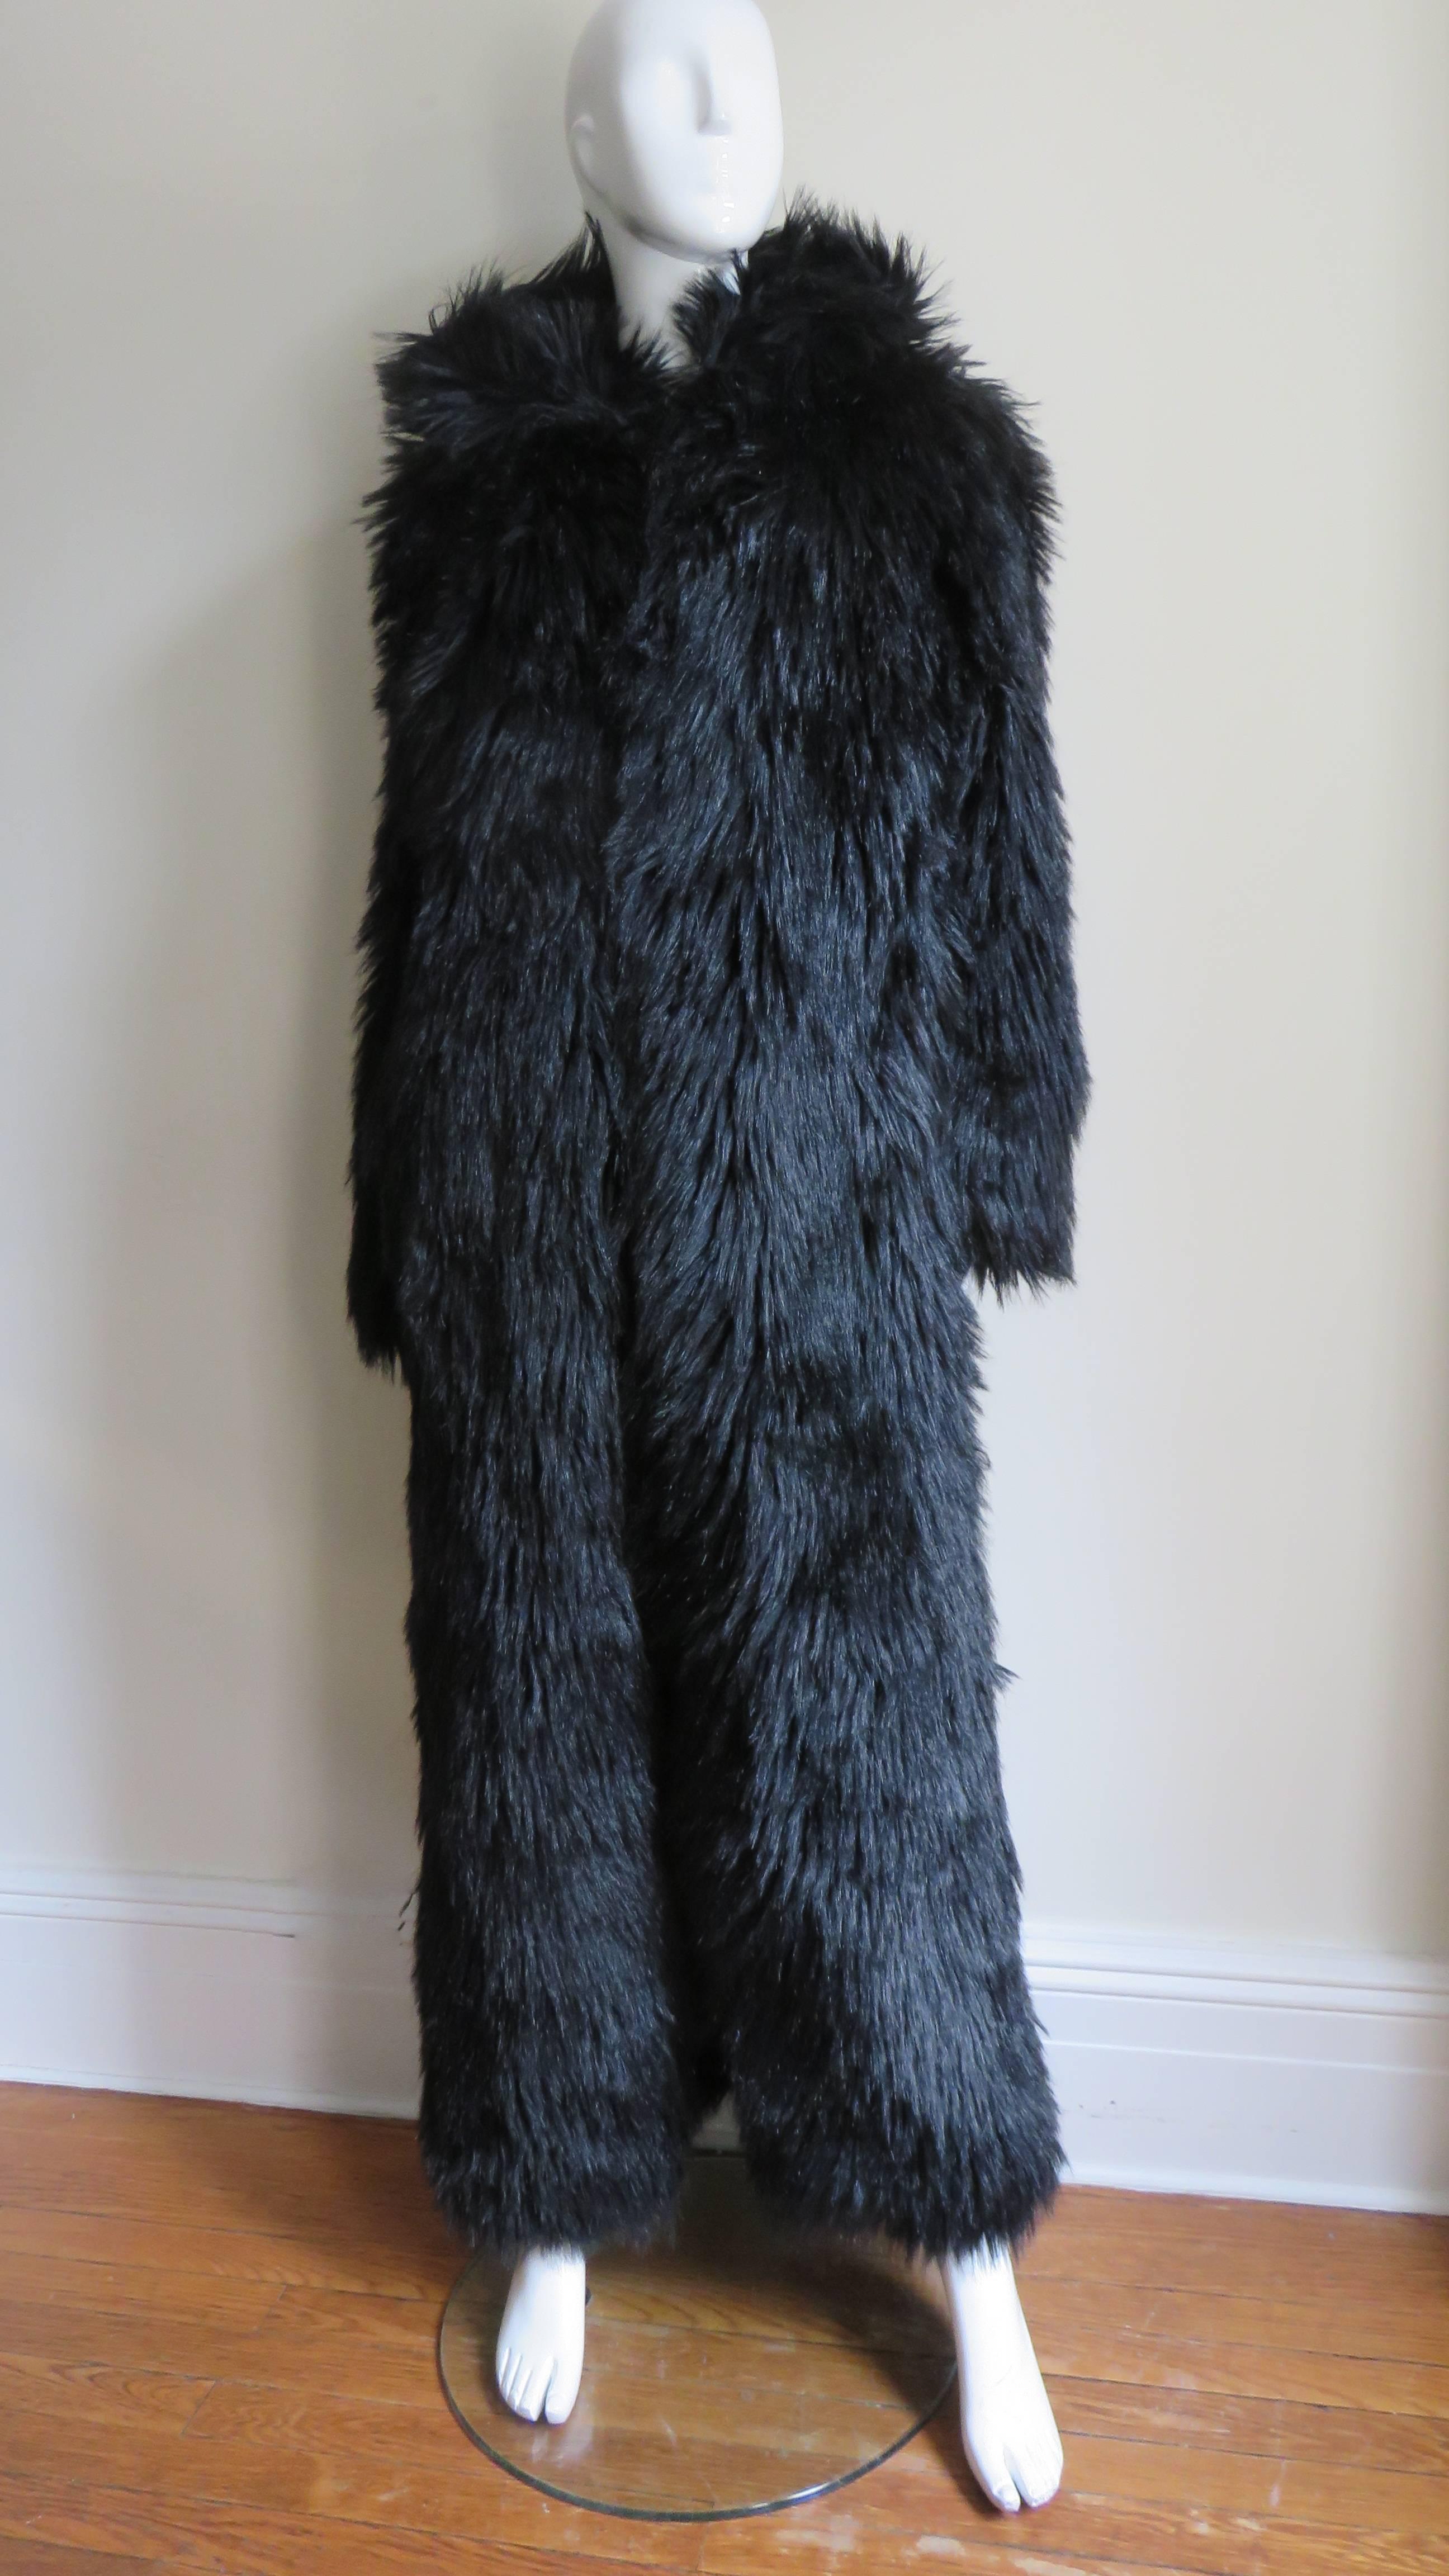 A fabulous black faux fur full length maxi coat by Betsey Johnson.  It has a hood, side seam pockets and long soft luxurious faux fur.  It closes in the front with fur hooks and is lined in black. 
Unworn.  Fits Small, Medium.

Bust  42